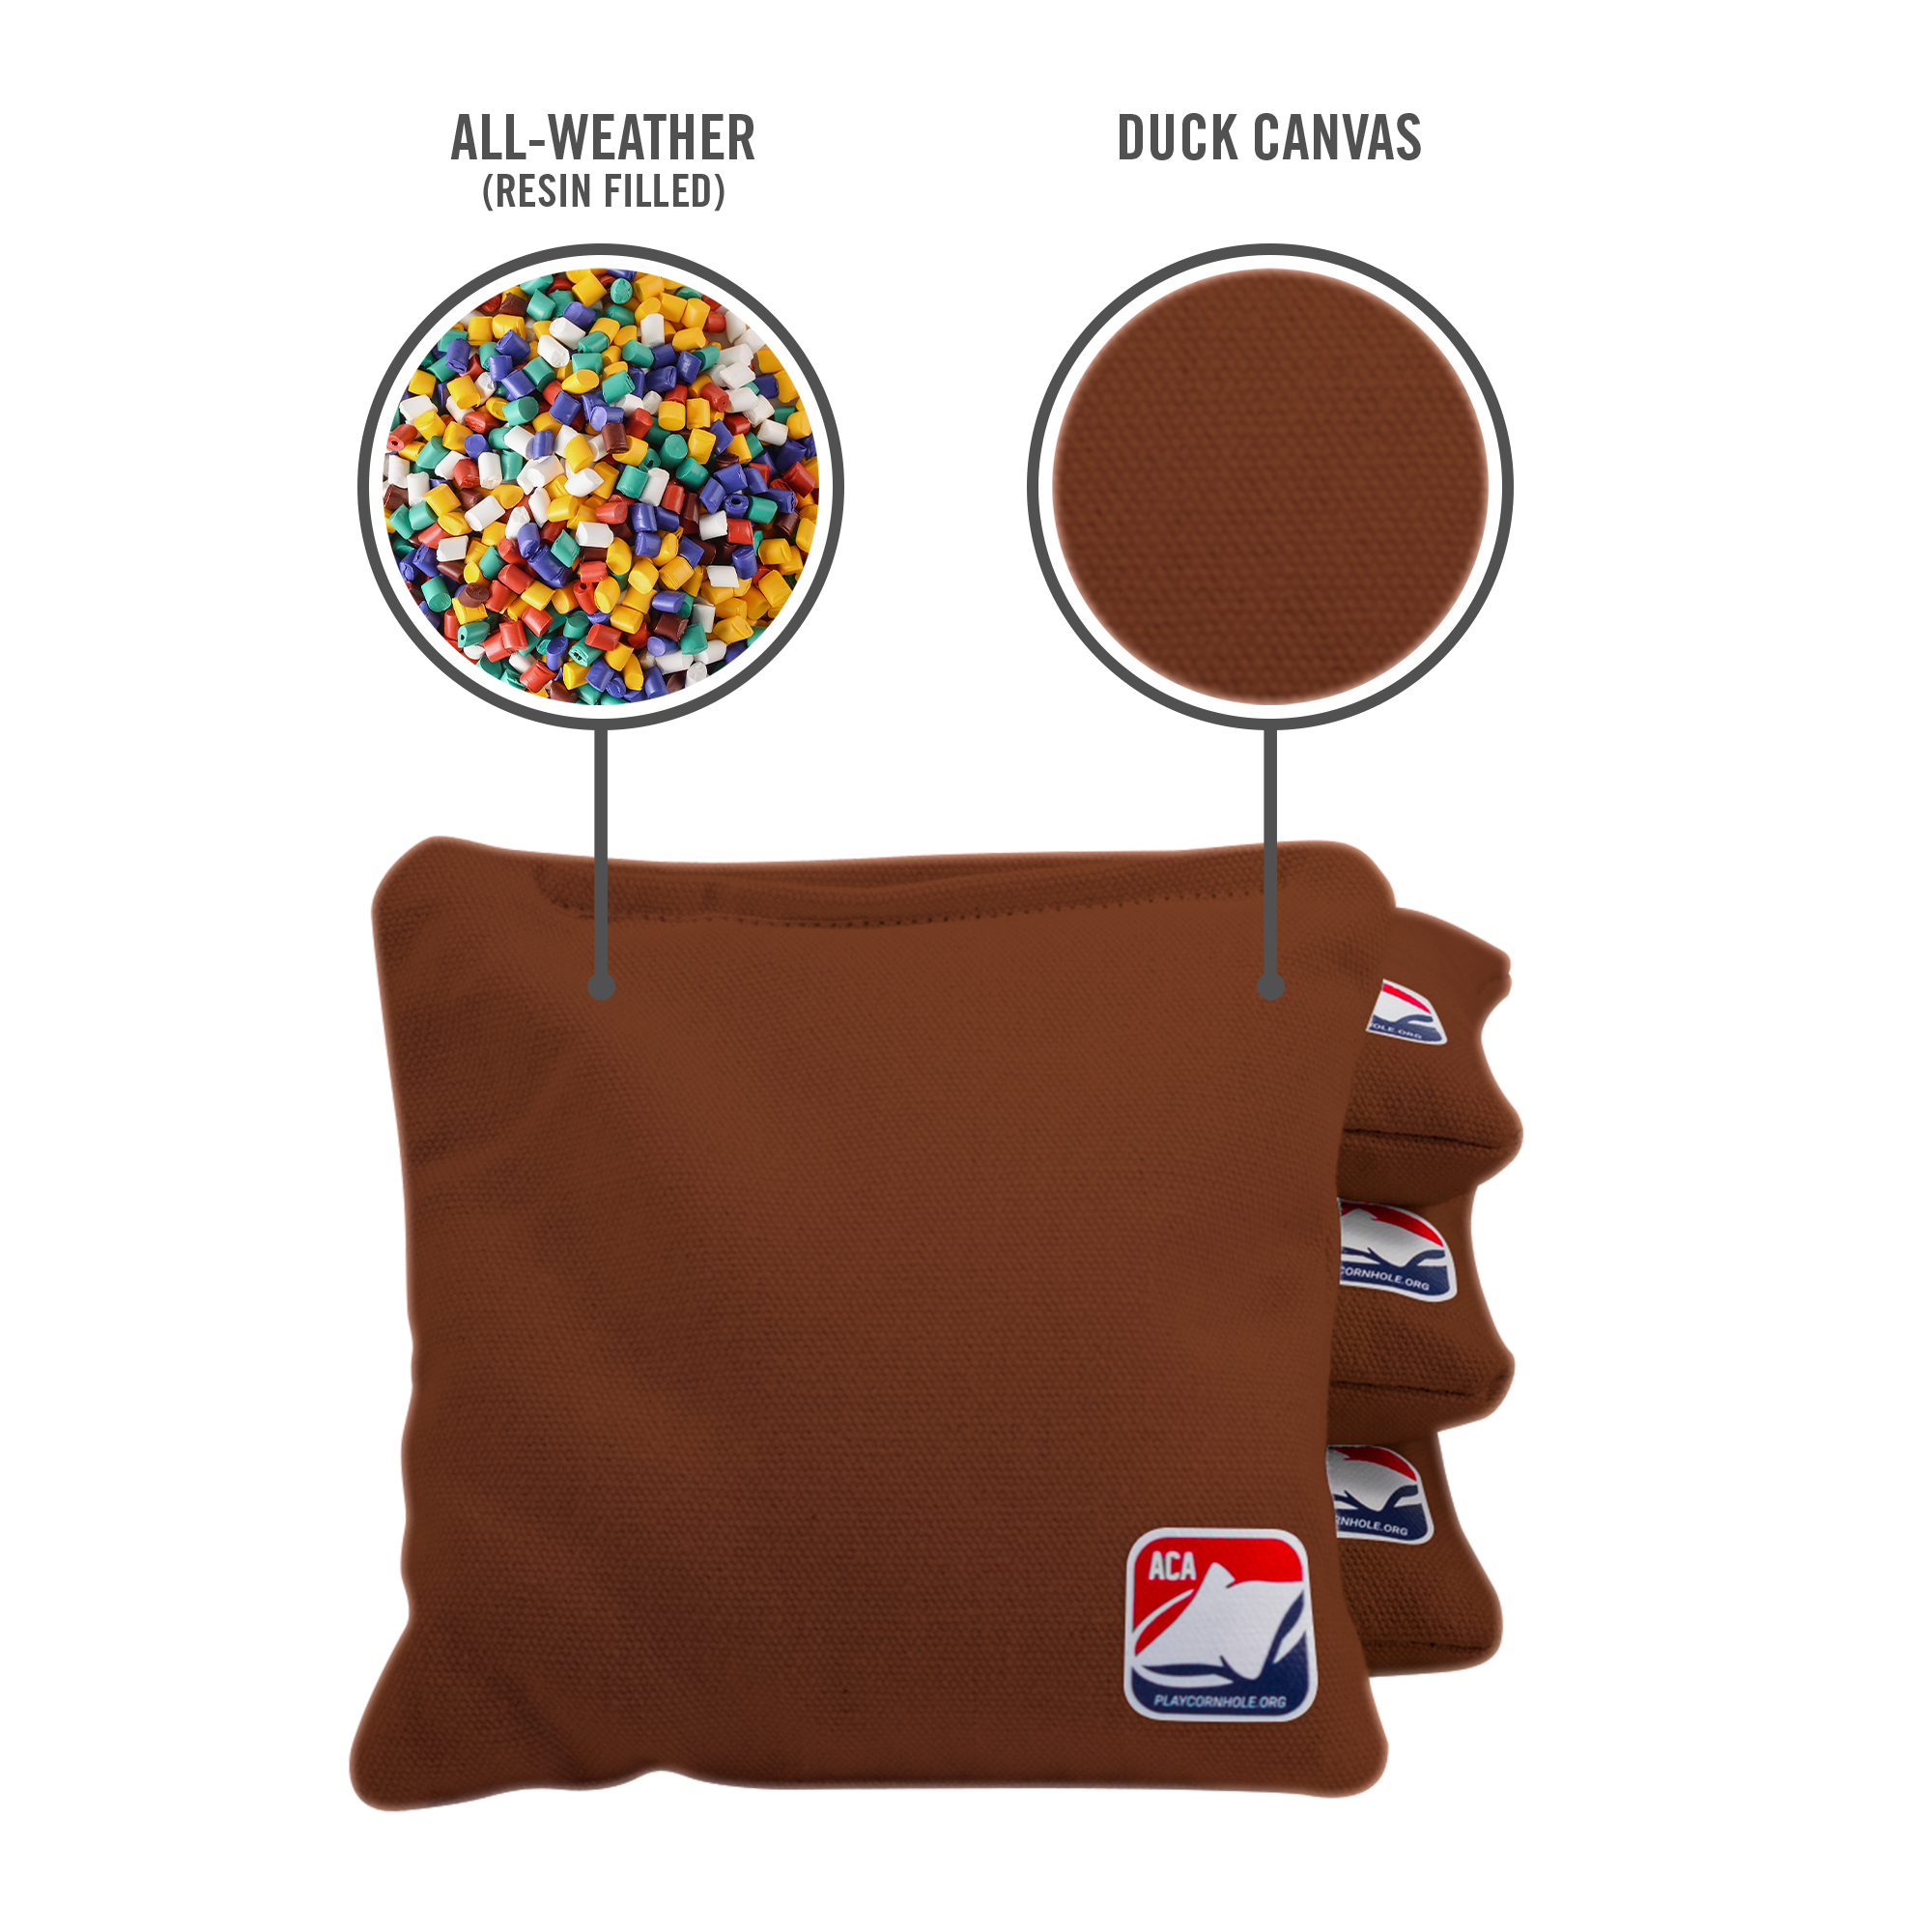 6-in Daily 66x Brown Competition Regulation Cornhole Bags